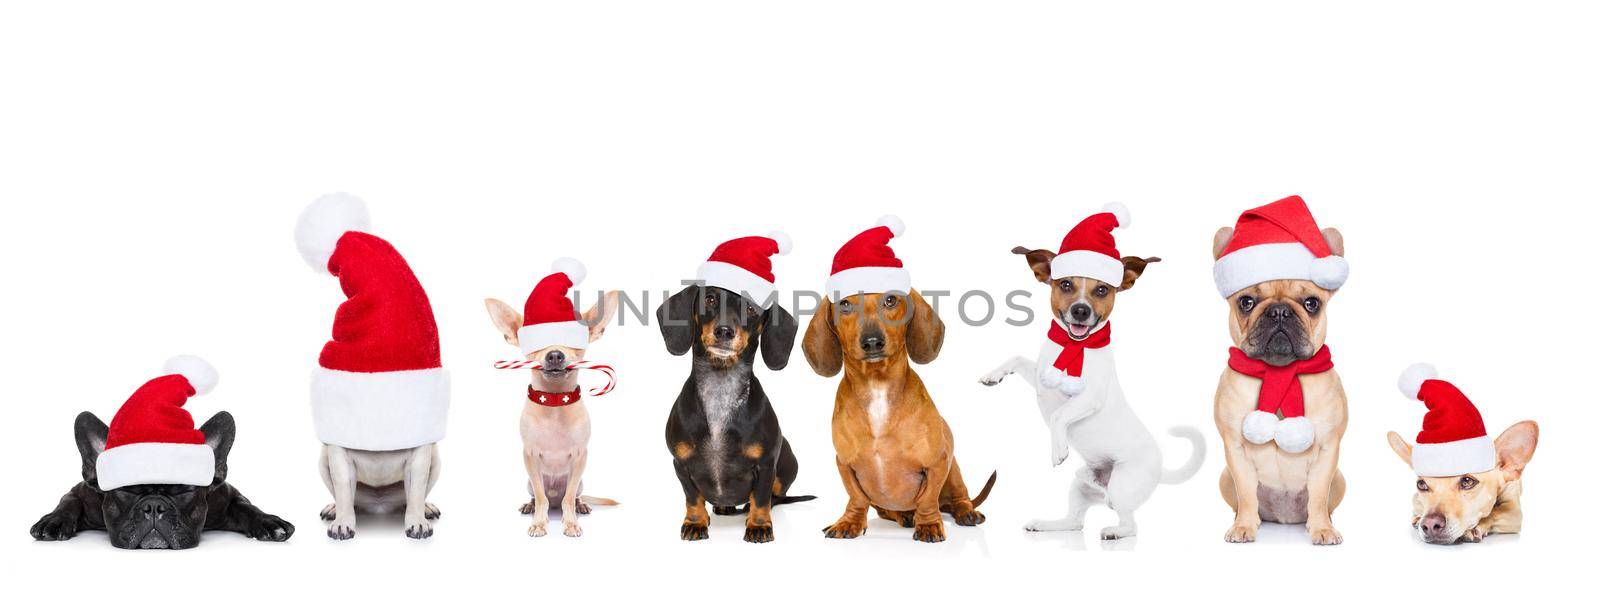 christmas  santa claus row of dogs isolated on white background,  with   funny  red holidays hat